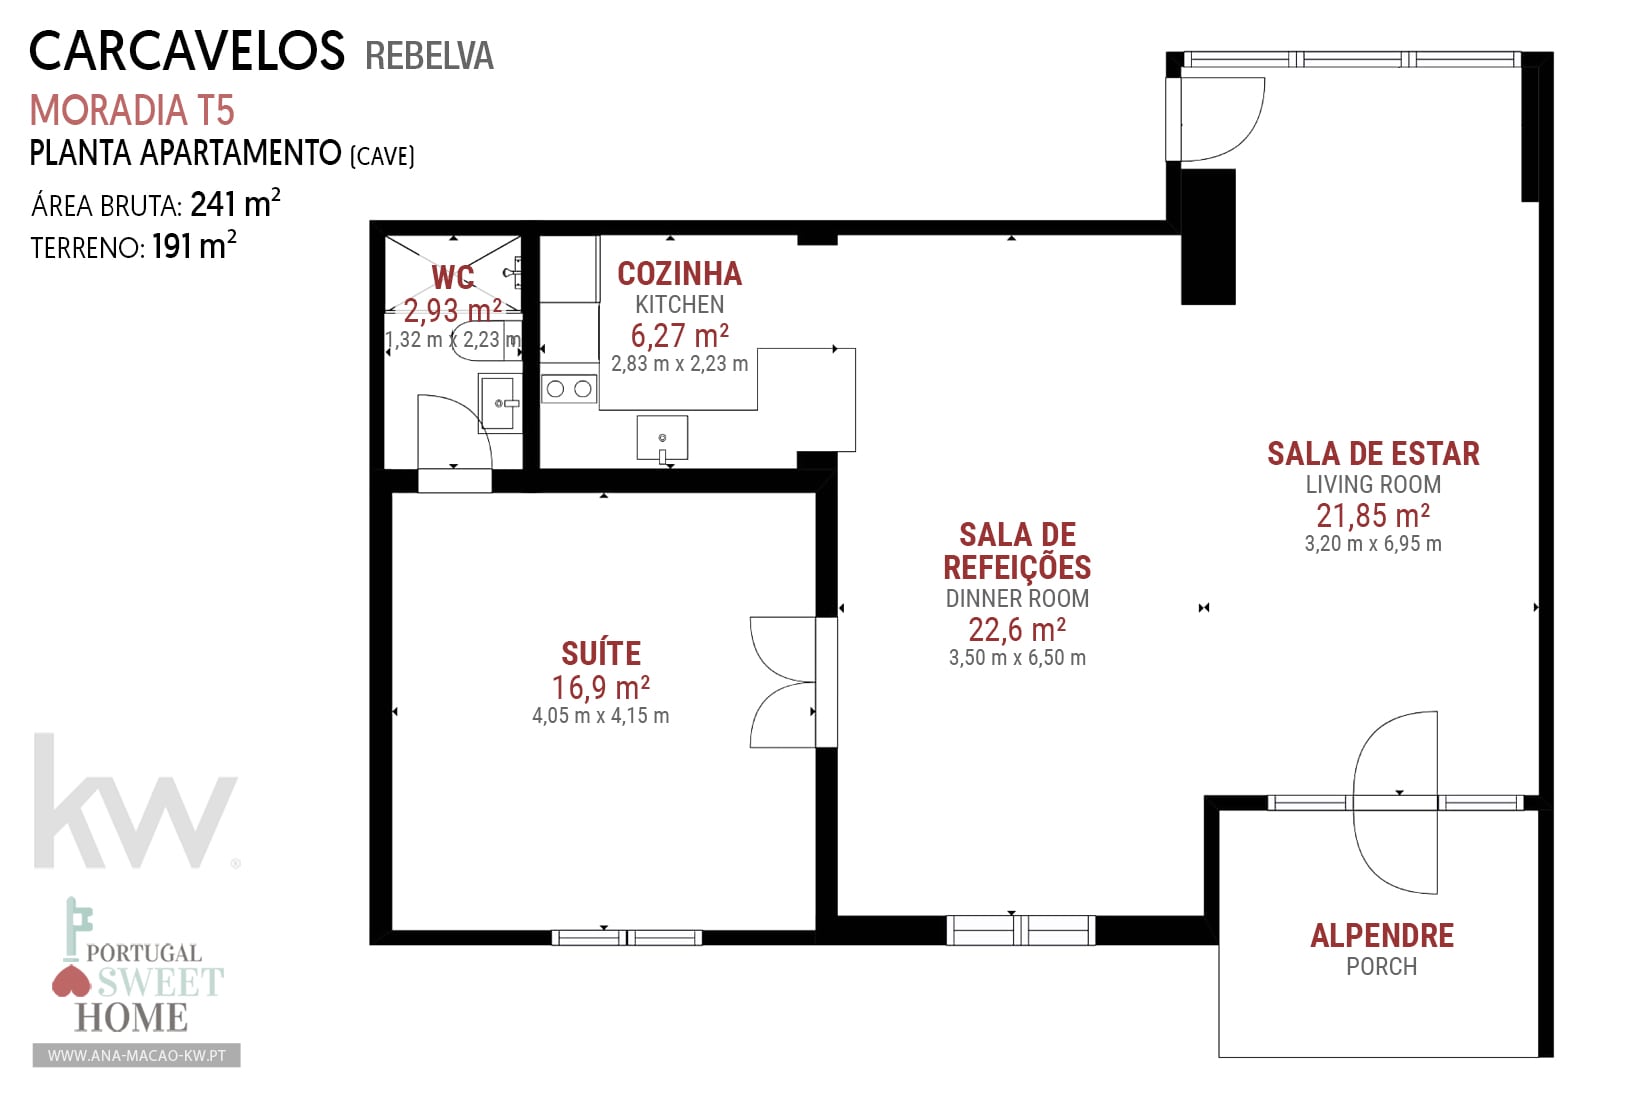 Basement plan where the independent 1 bedroom apartment is located (70.55 m²)